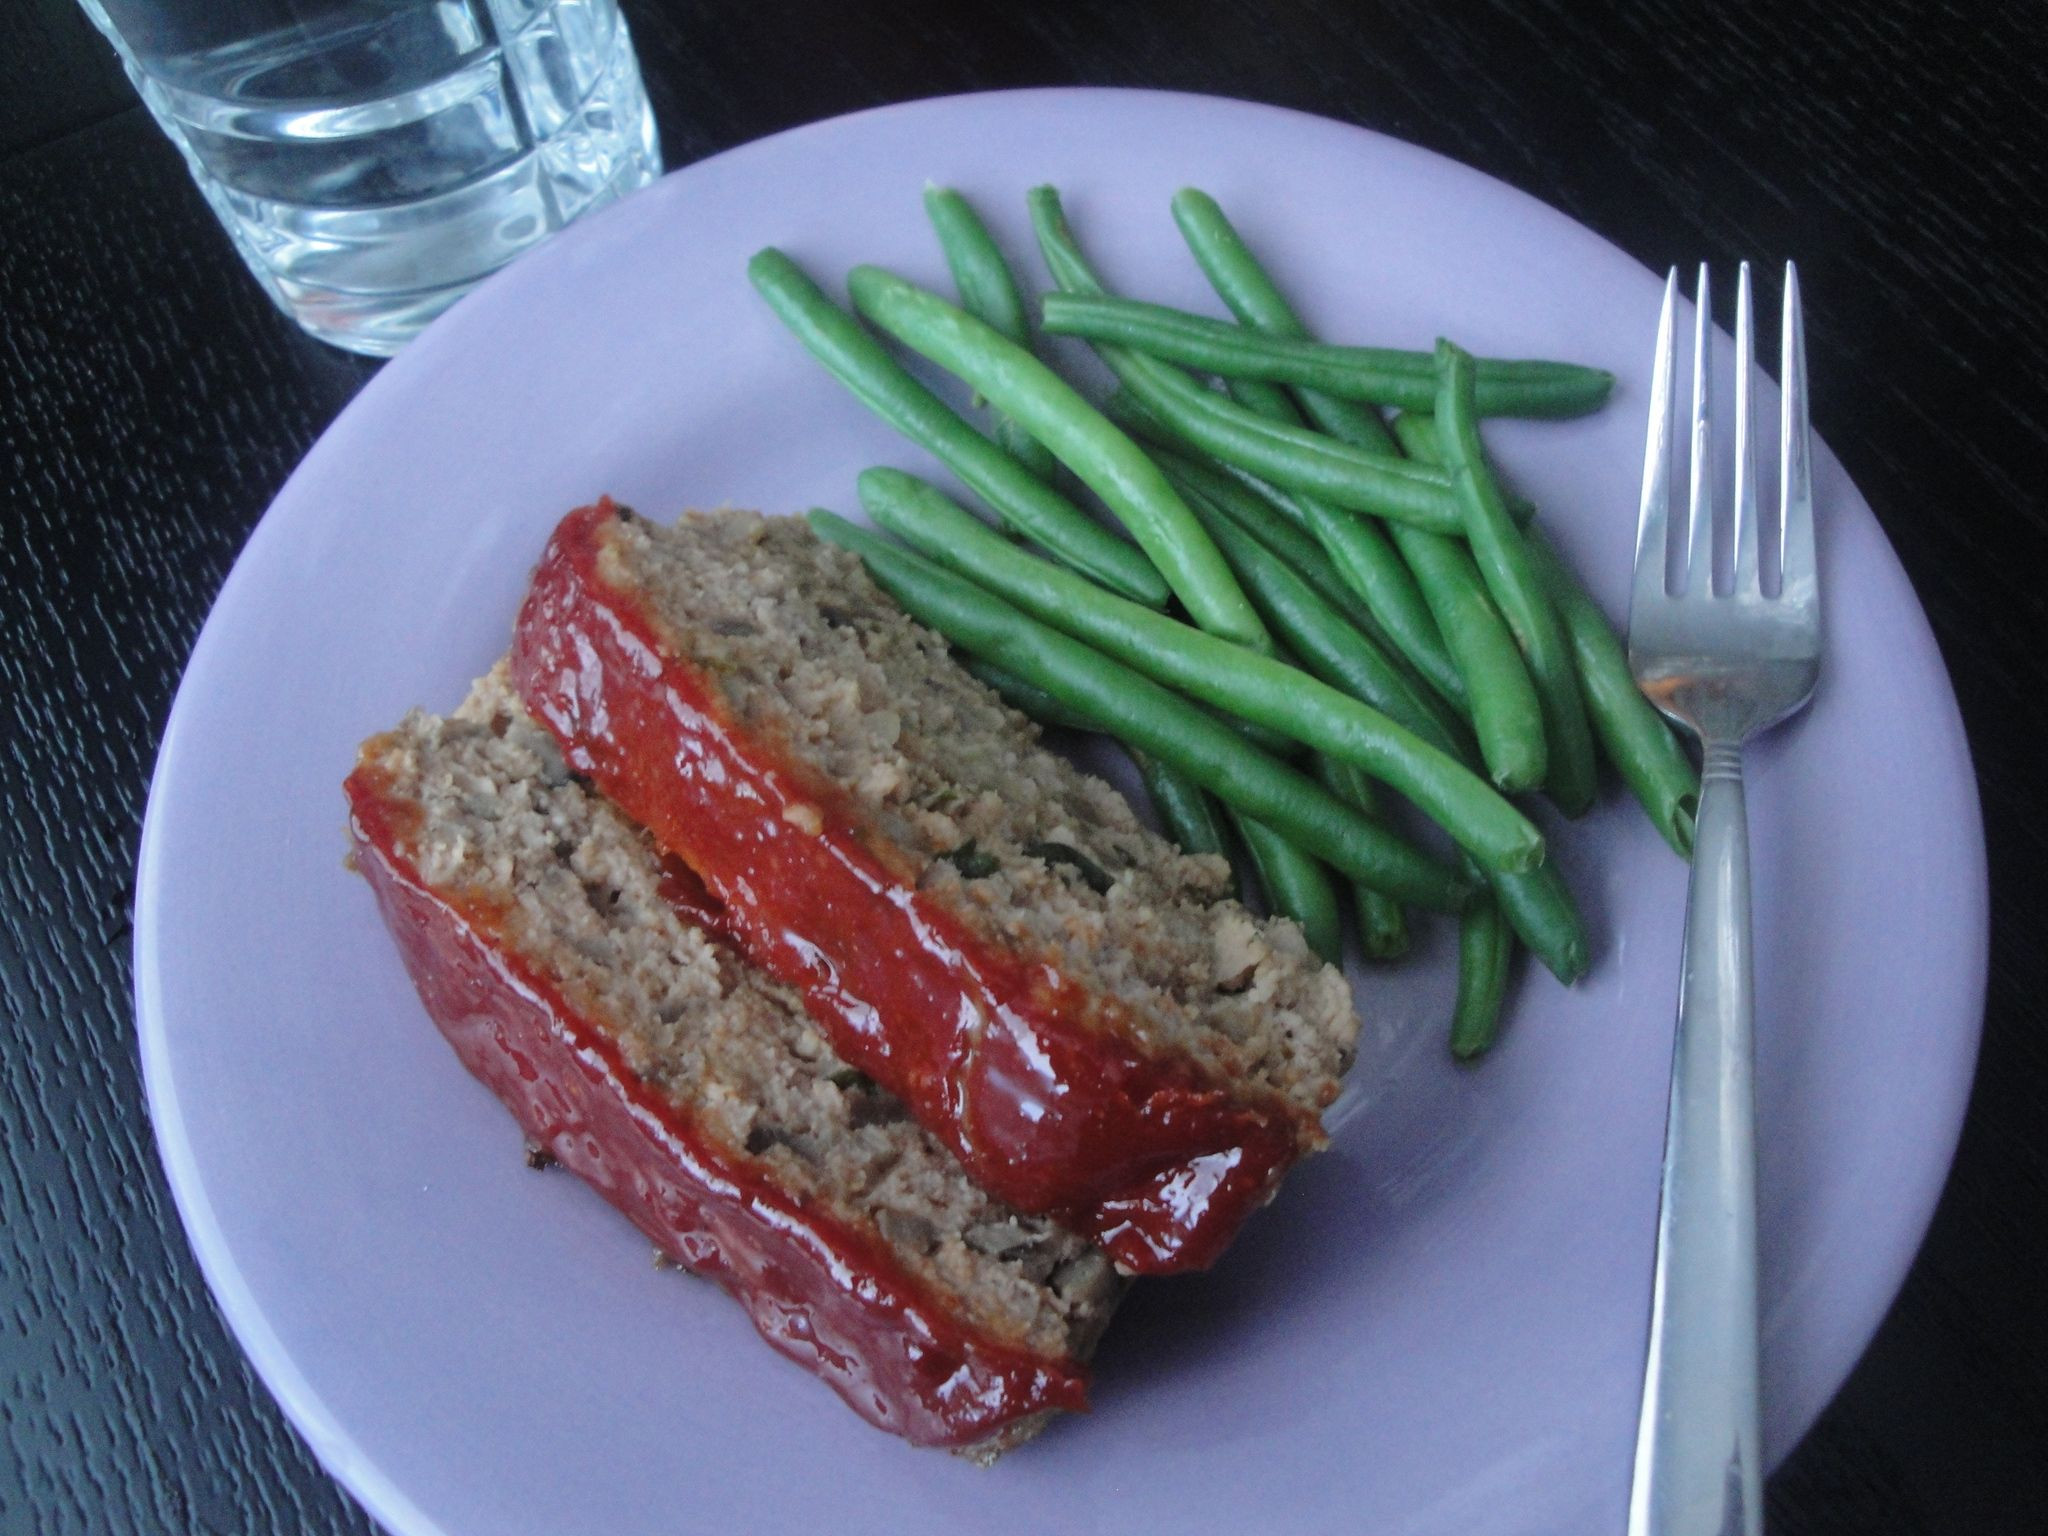 Turkey And Quinoa Meatloaf
 I have a delicious spicy turkey and quinoa meatloaf